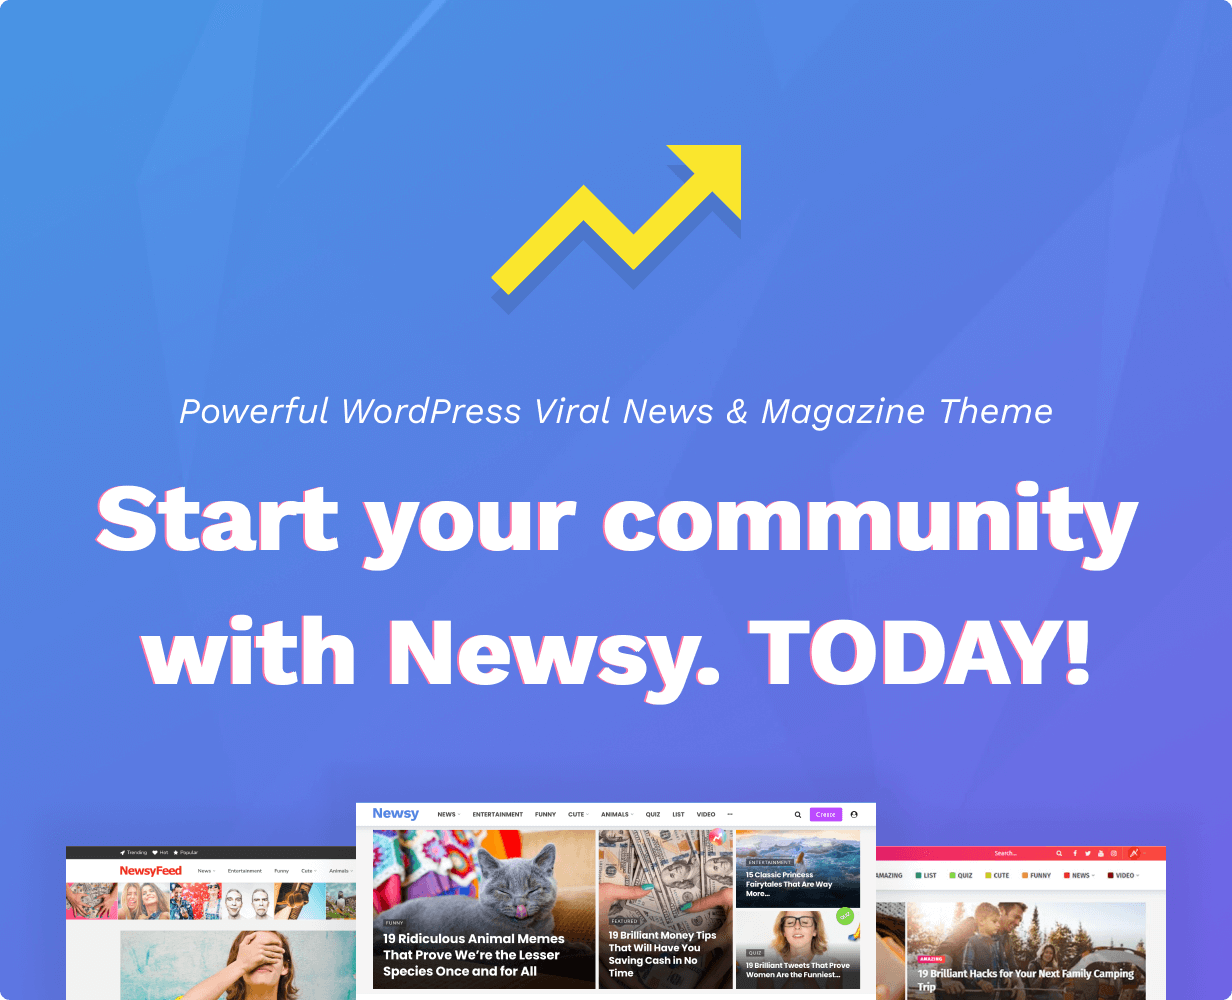 Start your community with Newsy. TODAY!